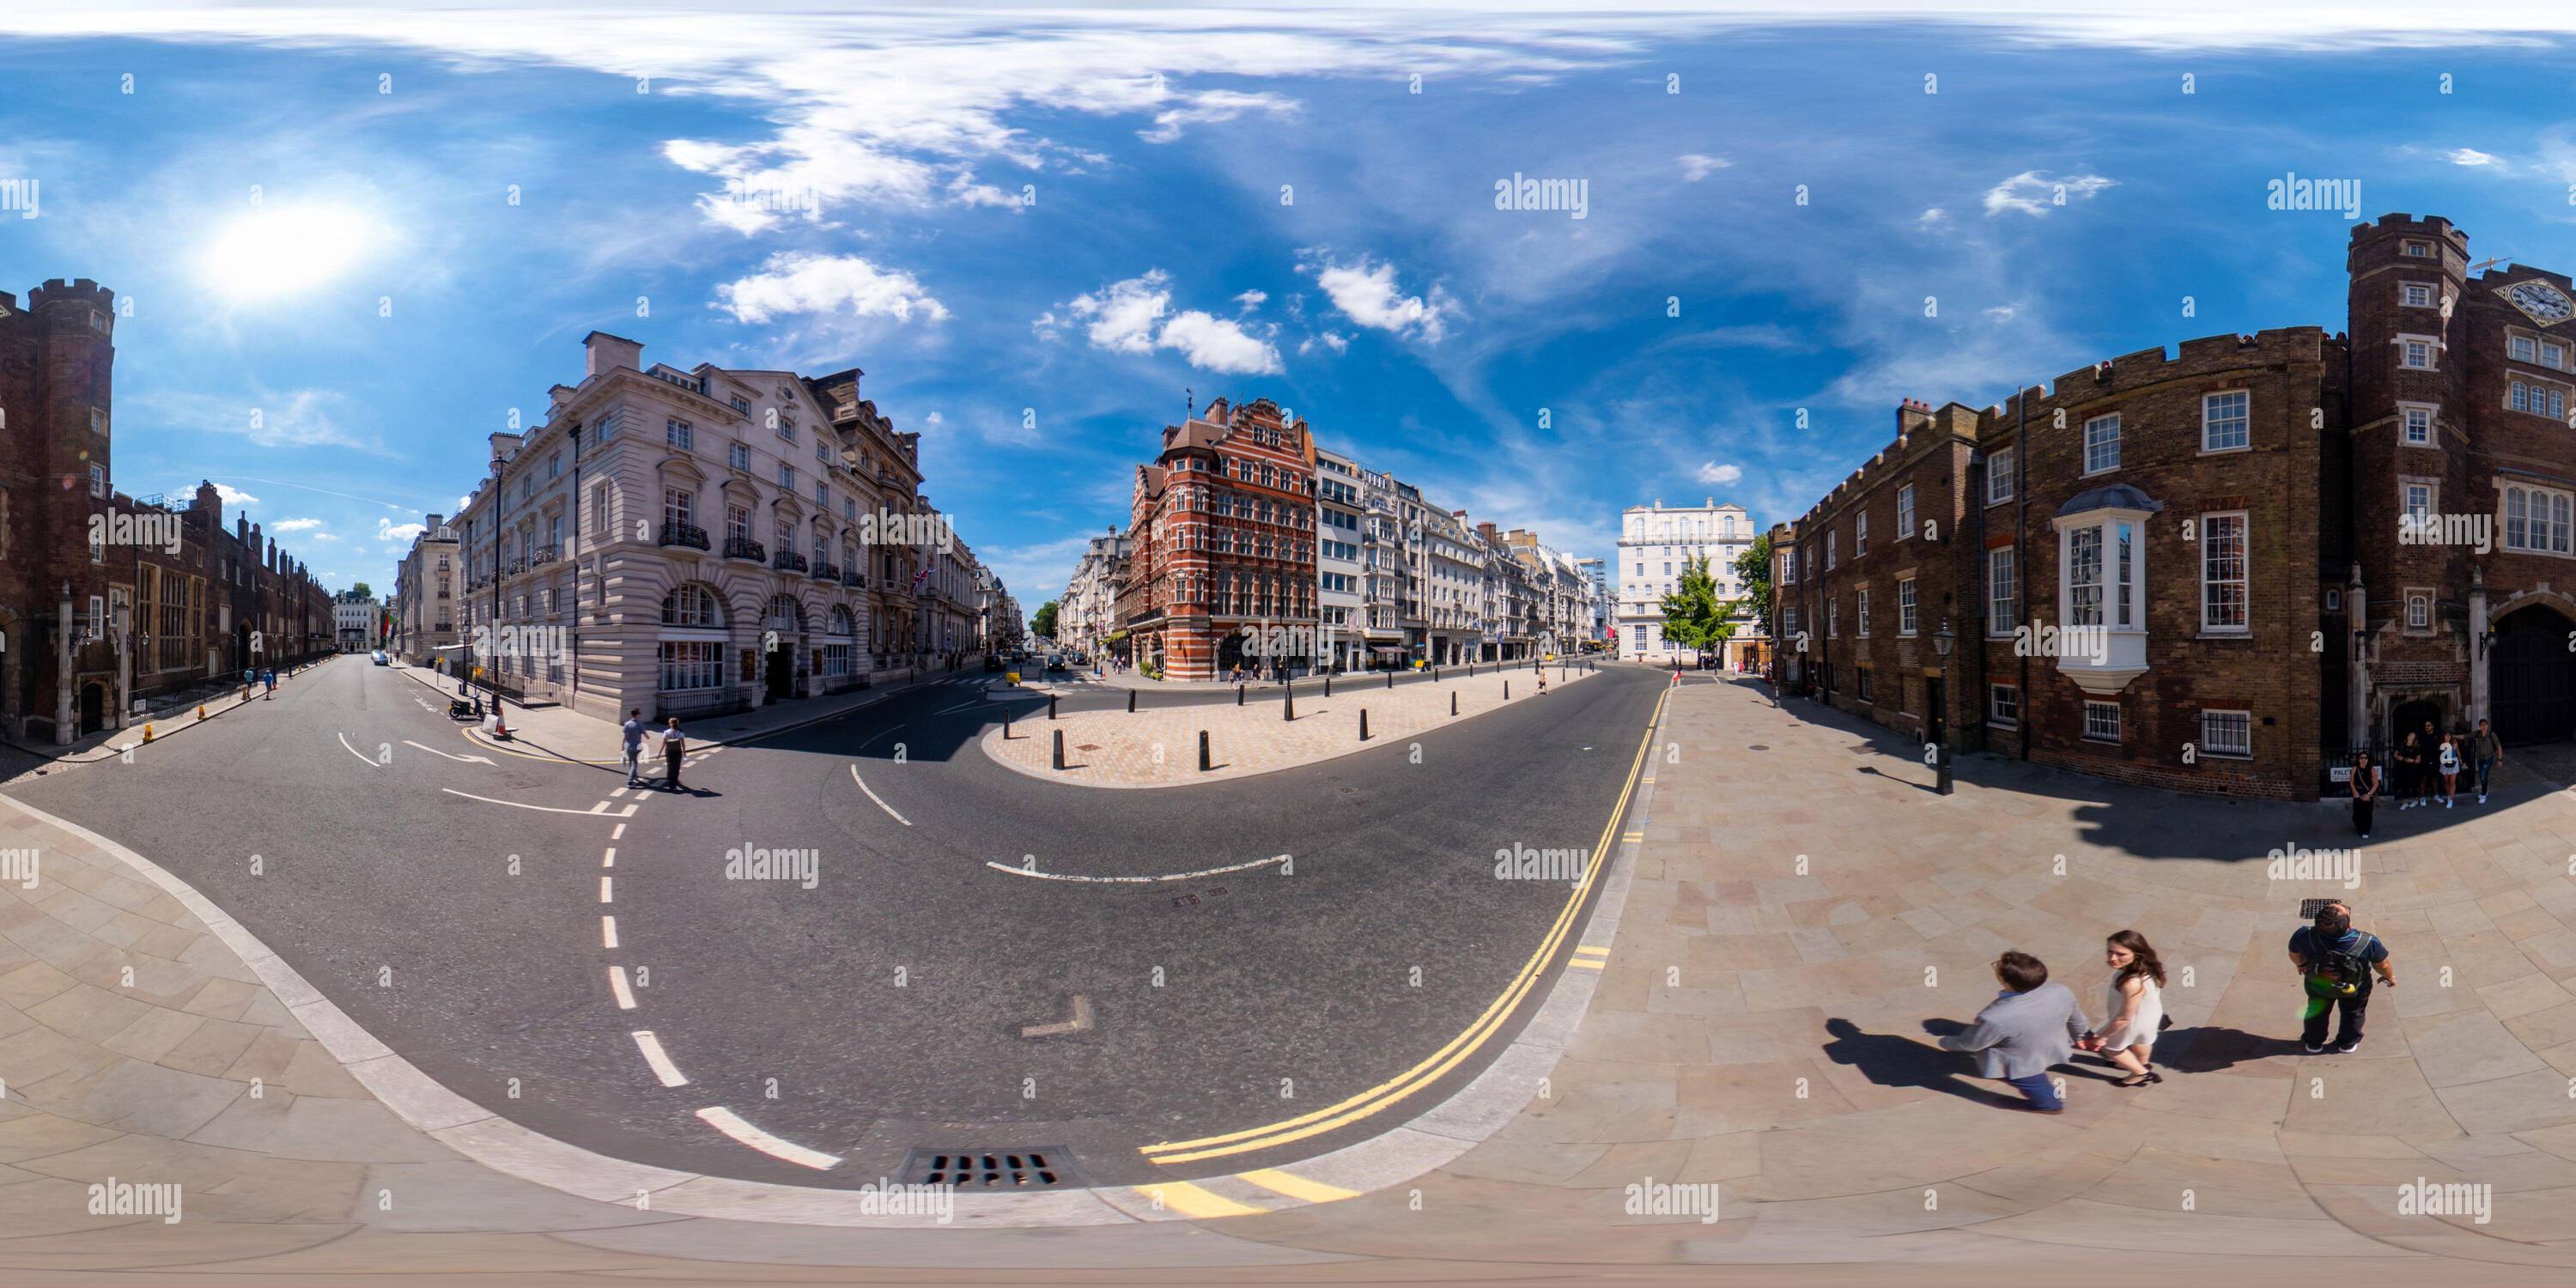 360 degree panoramic view of 360 virtual tour London historic architecture